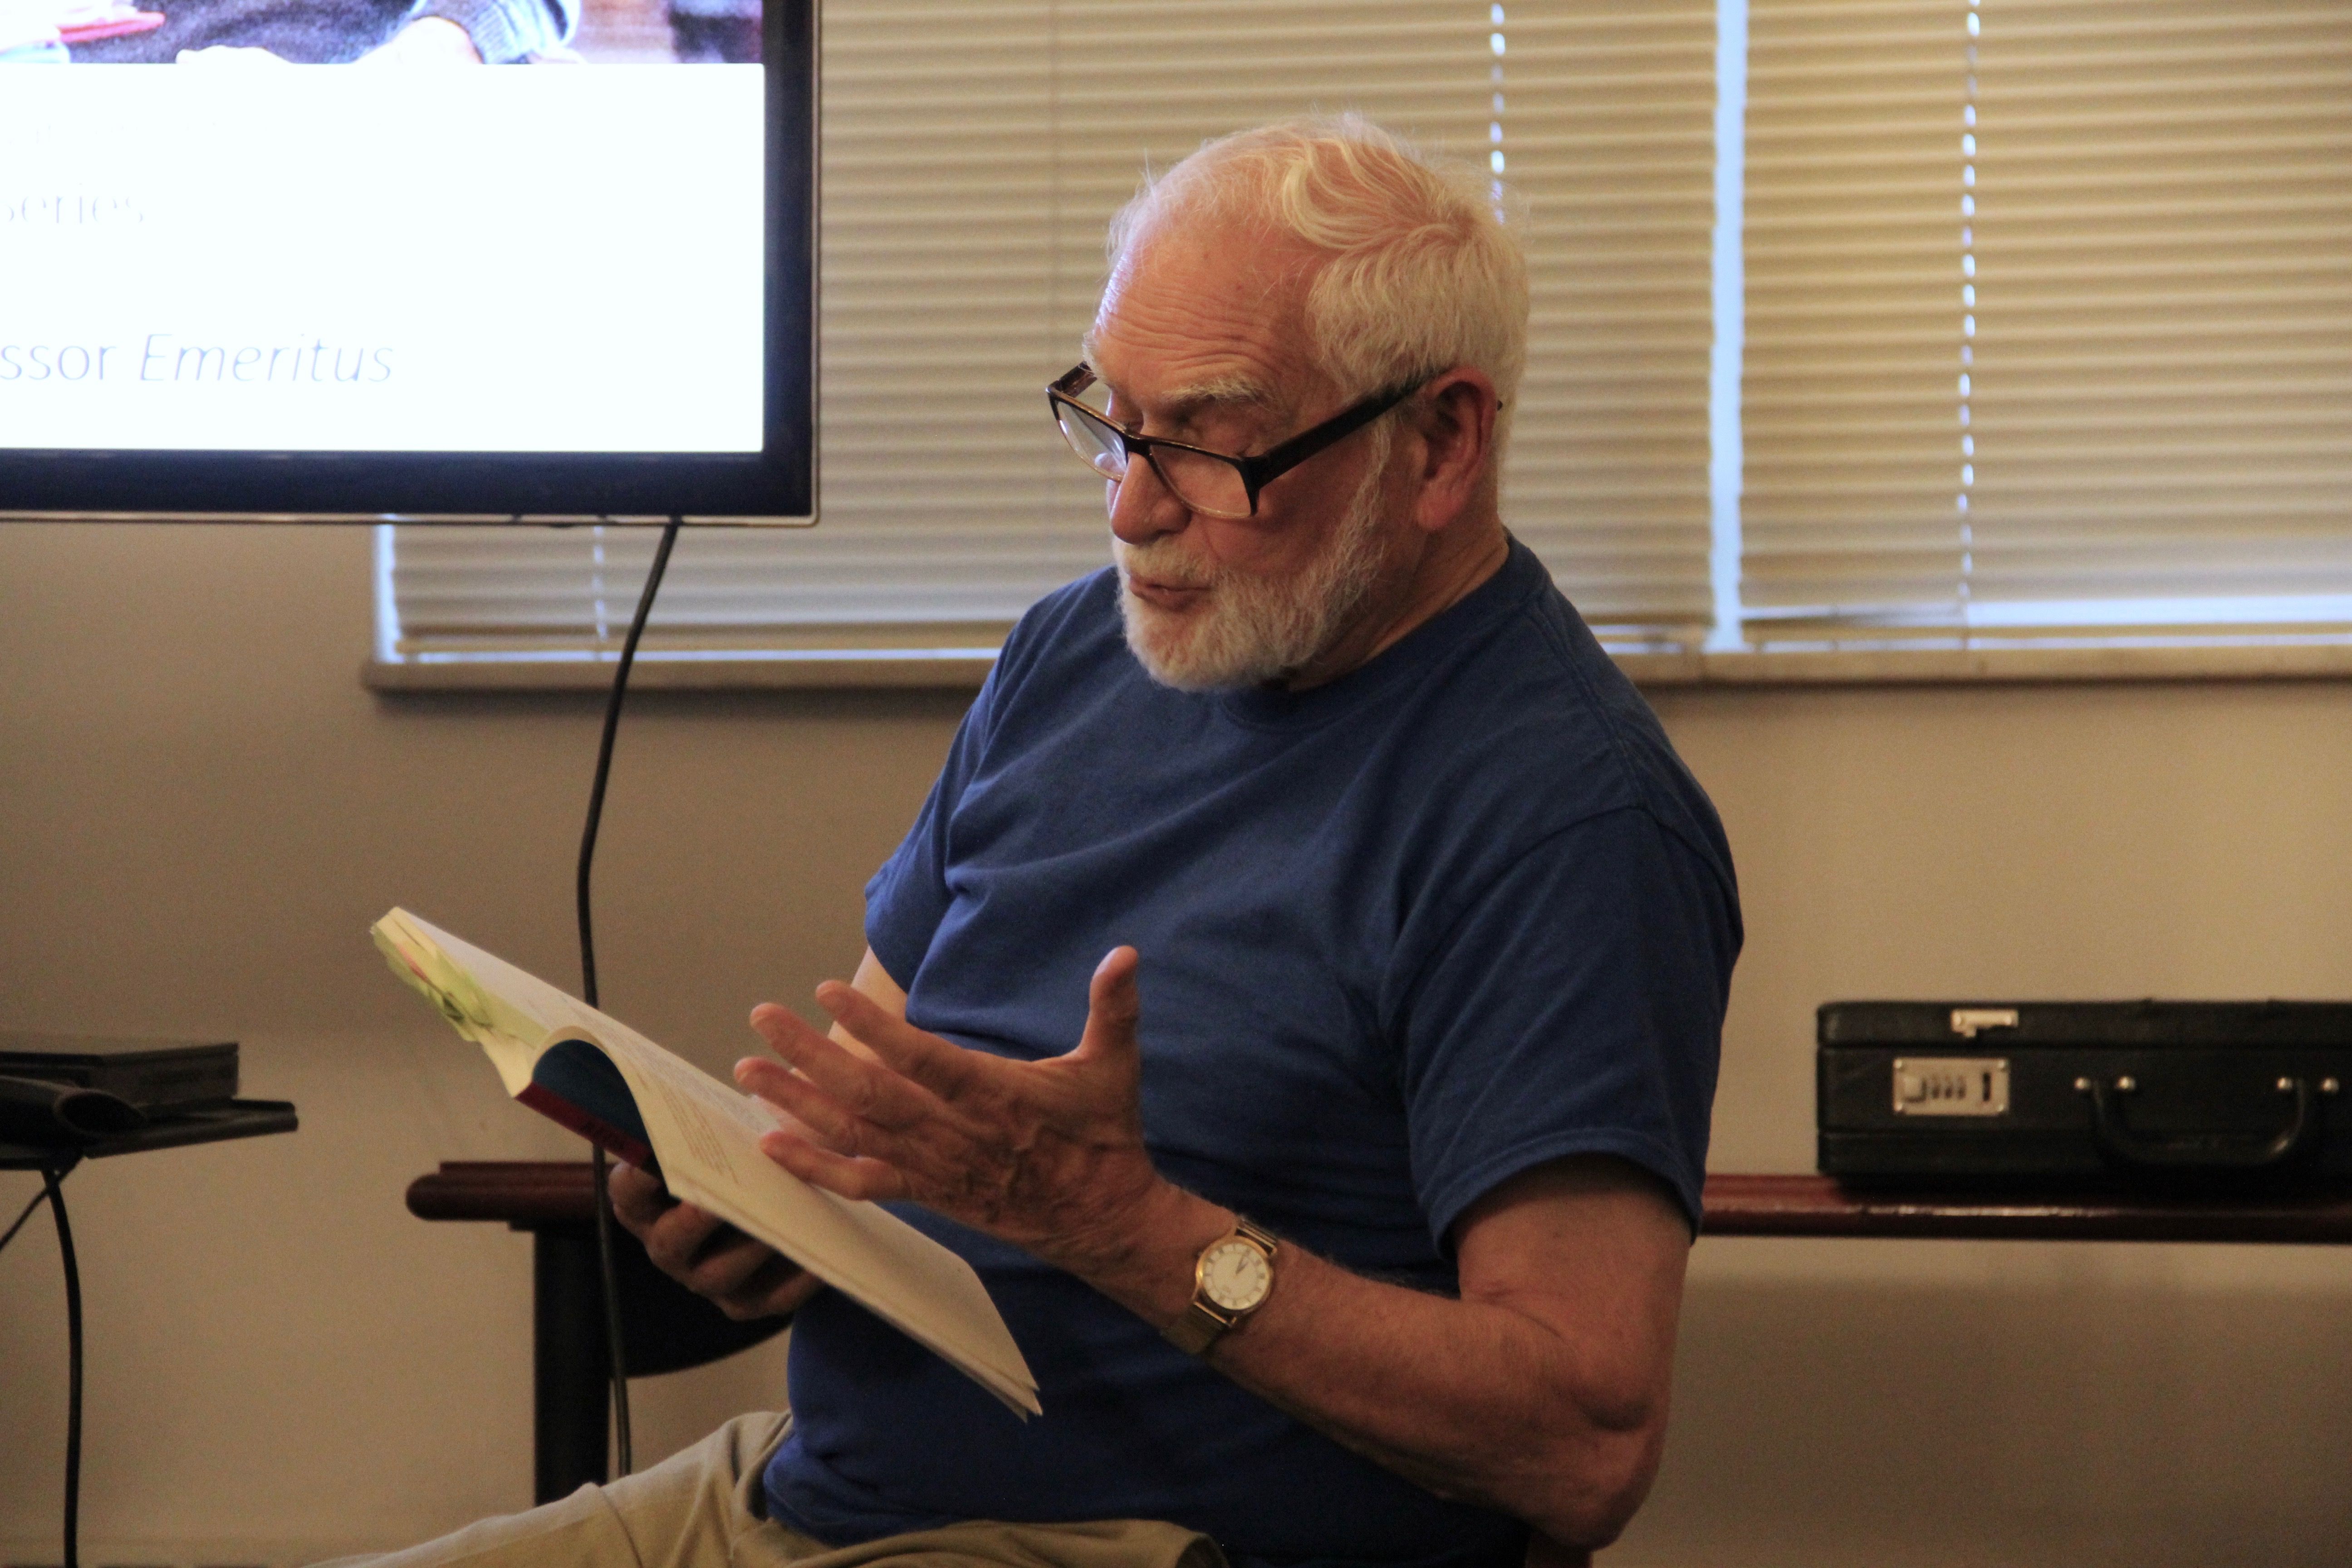 Dr. Romano reading from his book; Photo by Michelle Guerin